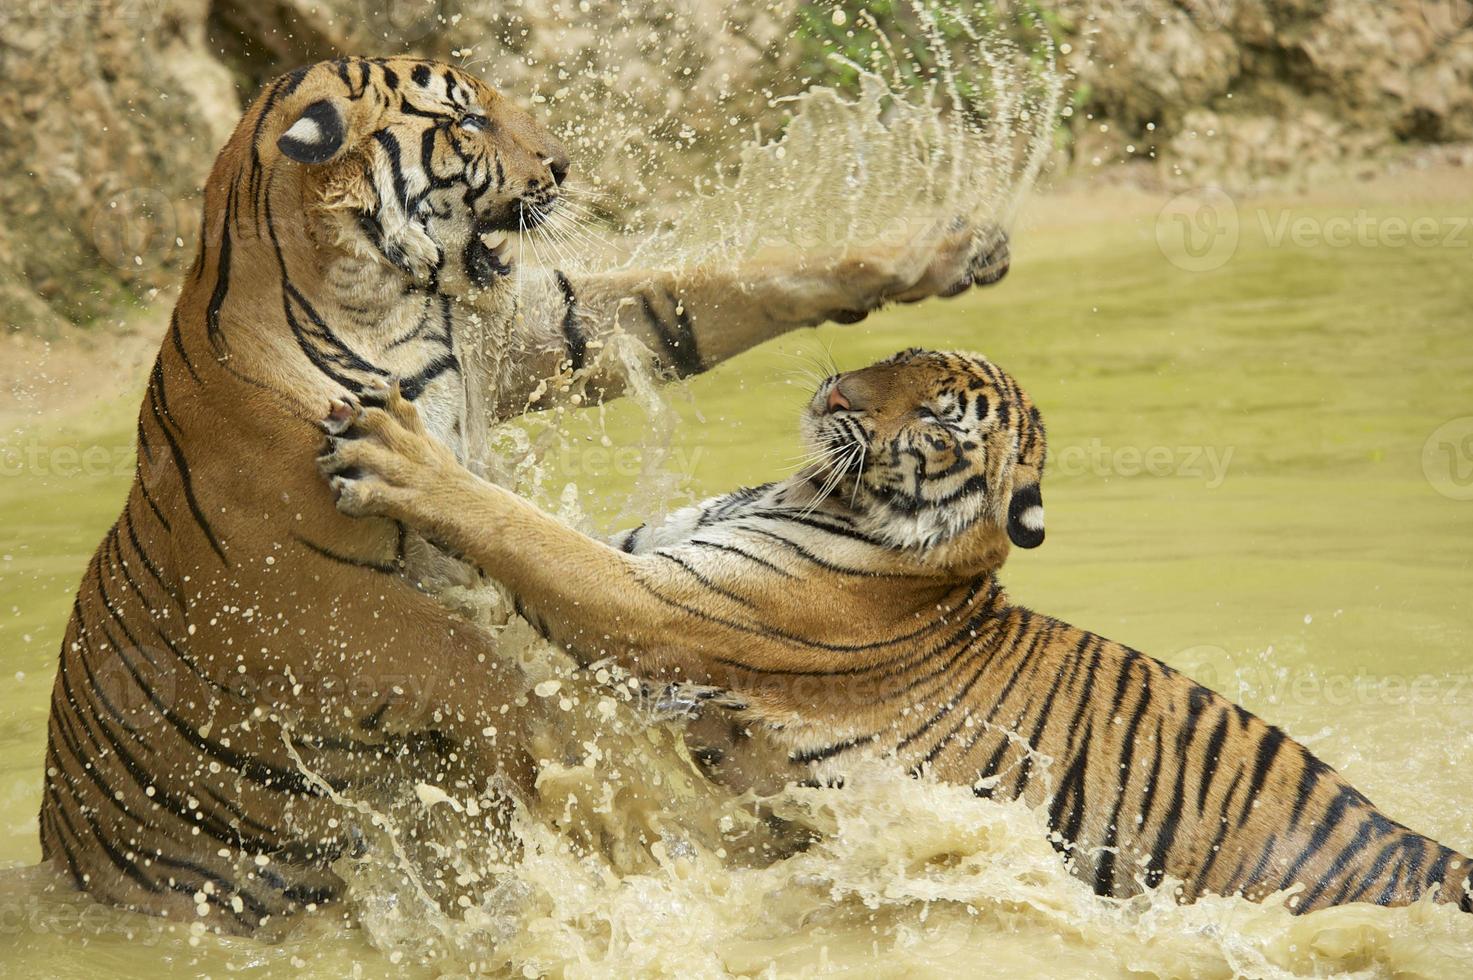 Adult Indochinese tigers fight in the water. photo